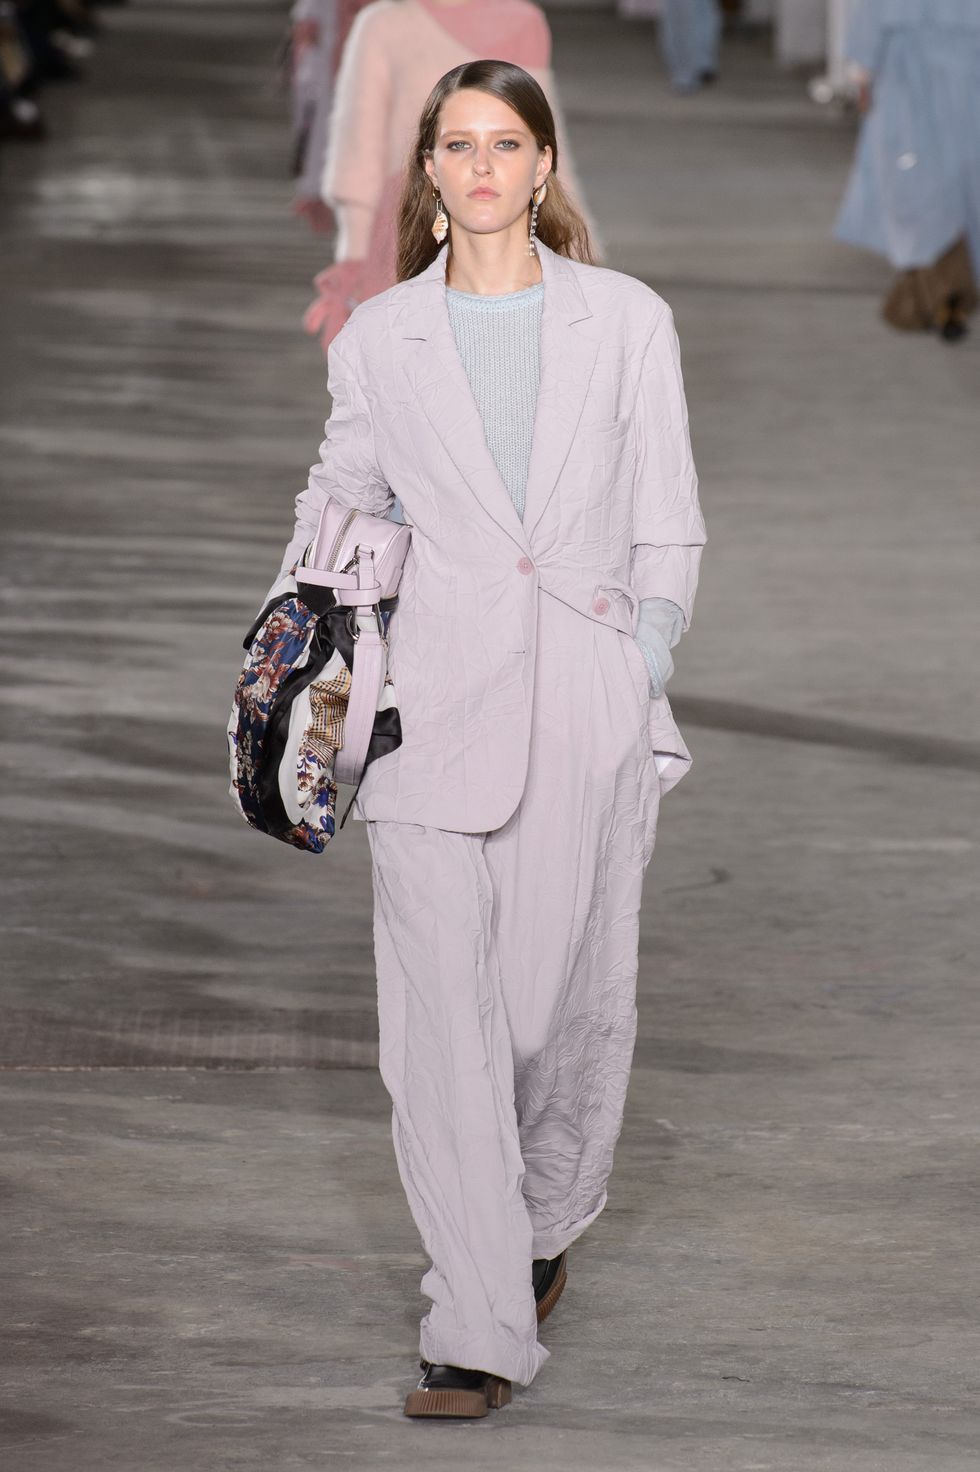 Looks From 3.1 Phillip Lim Fall 2018 NYFW Show – 3.1 Phillip Lim Runway ...